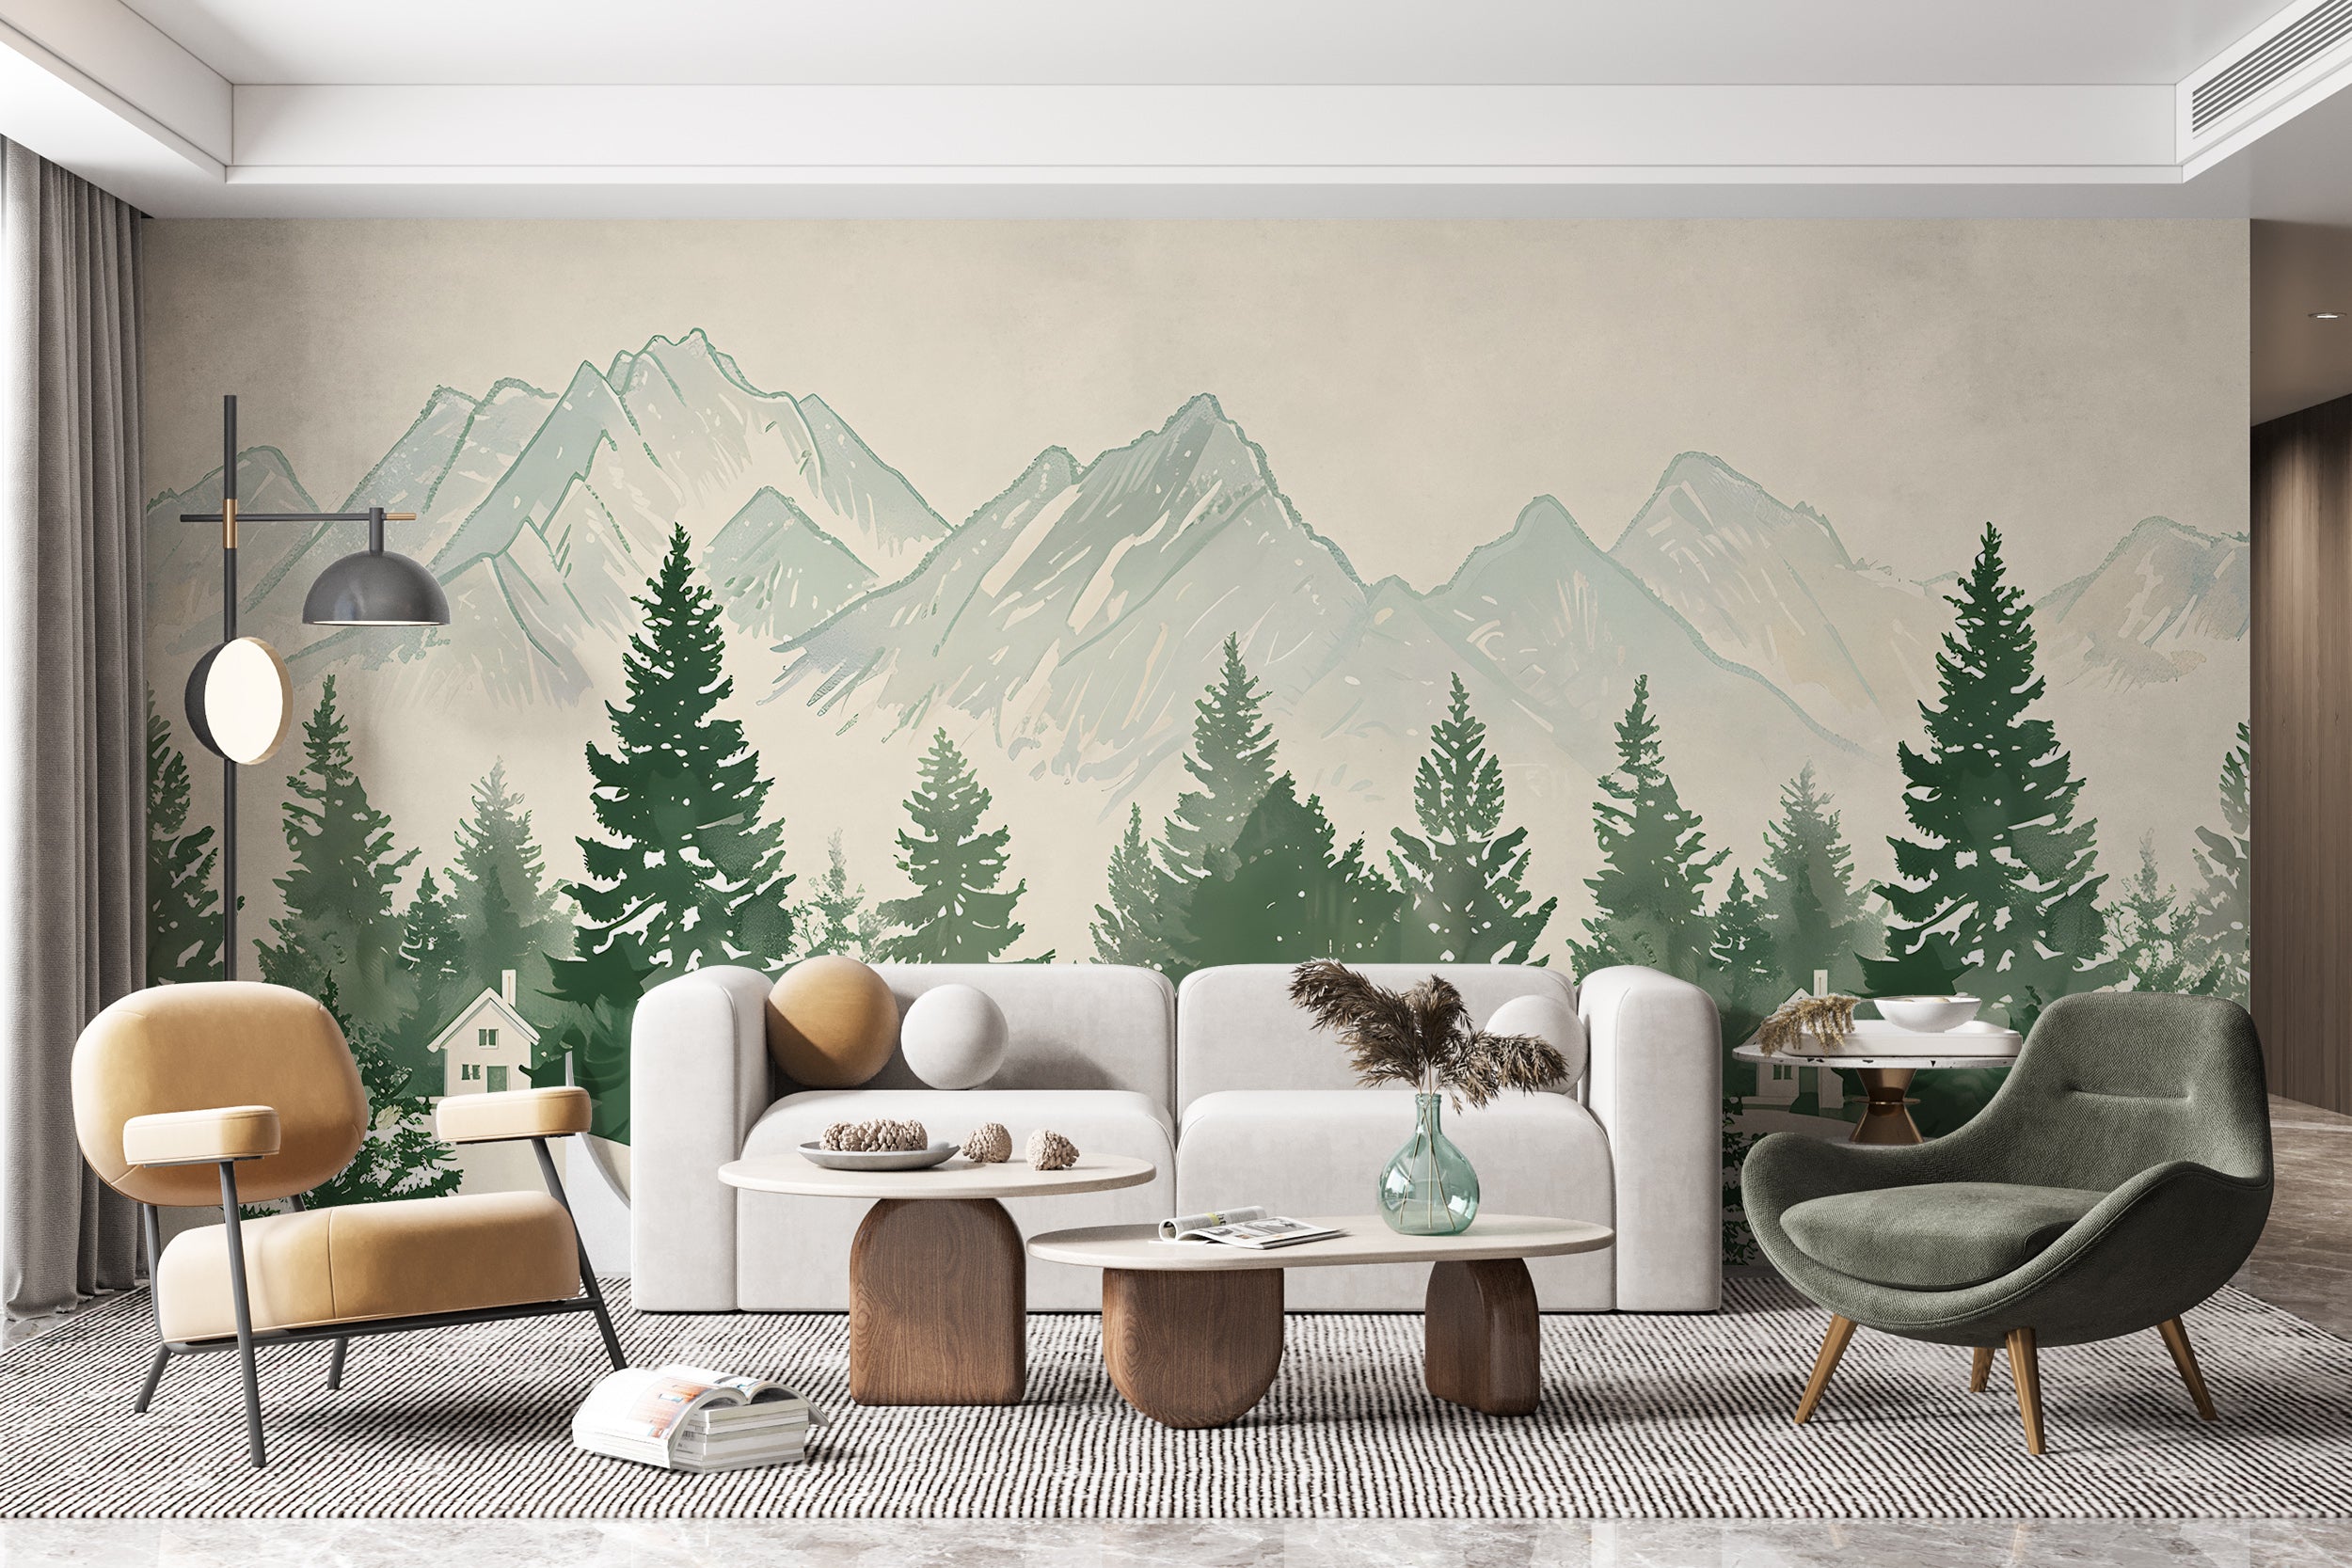 Monochrome Mountains and Forest Mural, Green and White Landscape Wallpaper, Self-adhesive Seamless Mountain Pattern, Removable Nature Decal